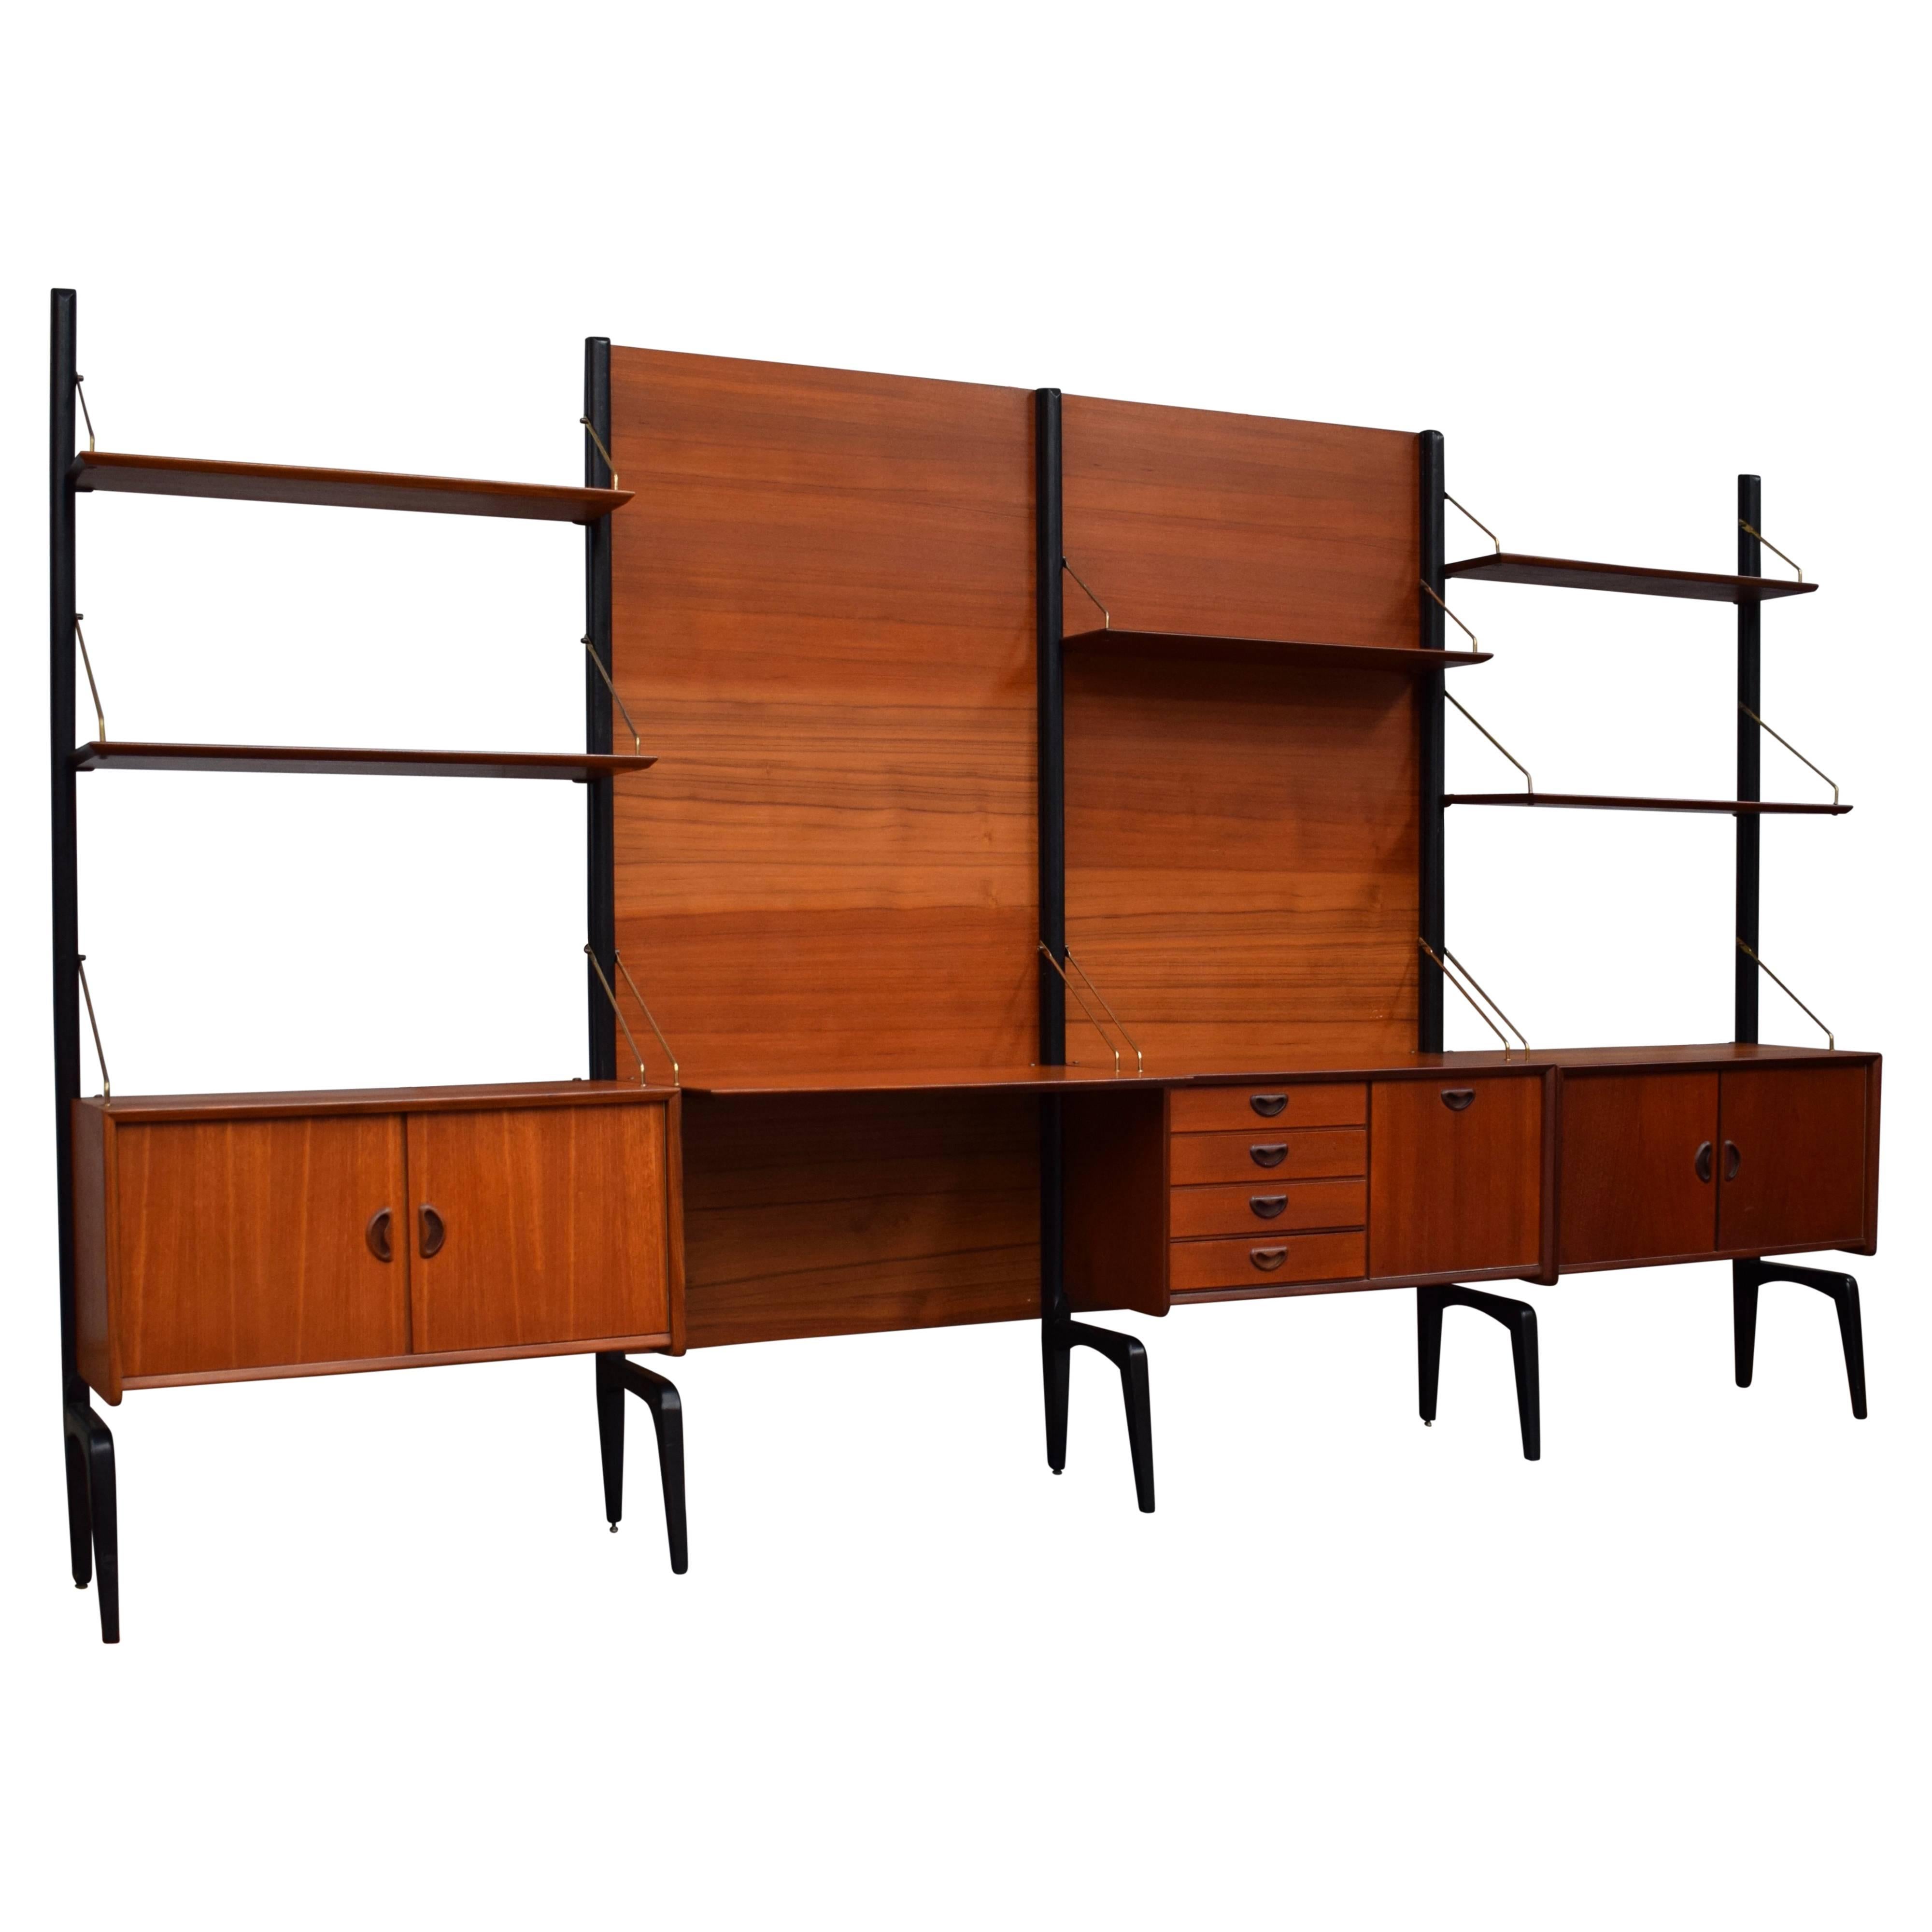 Freestanding modular wall-unit by Louis van Teeffelen for WéBé, 1960s. The back panels are rare to find. The unit is made of a combination of solid and veneer teak with brass details.

Designer: Louis Van Teeffelen

Manufacturer: WéBé, Walraven